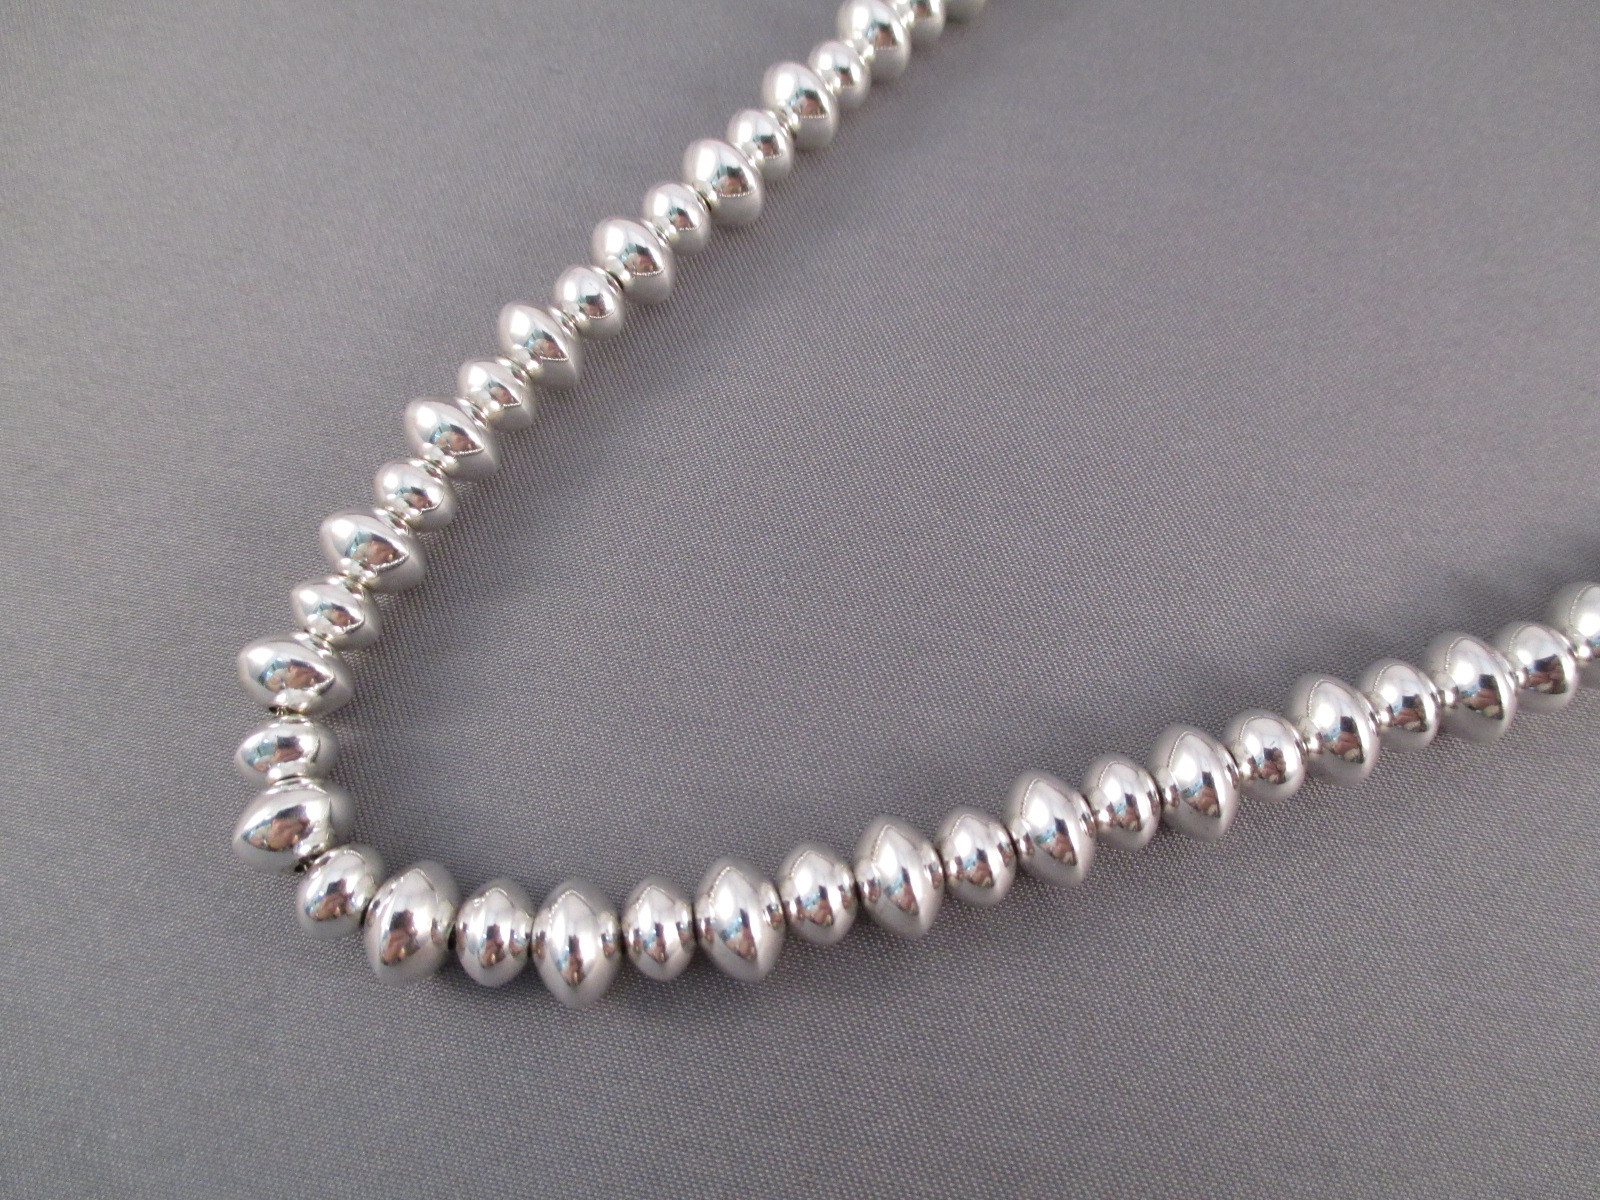 Silver Bead Necklace
 Polished Sterling Silver Bead Necklace by Al Joe Two